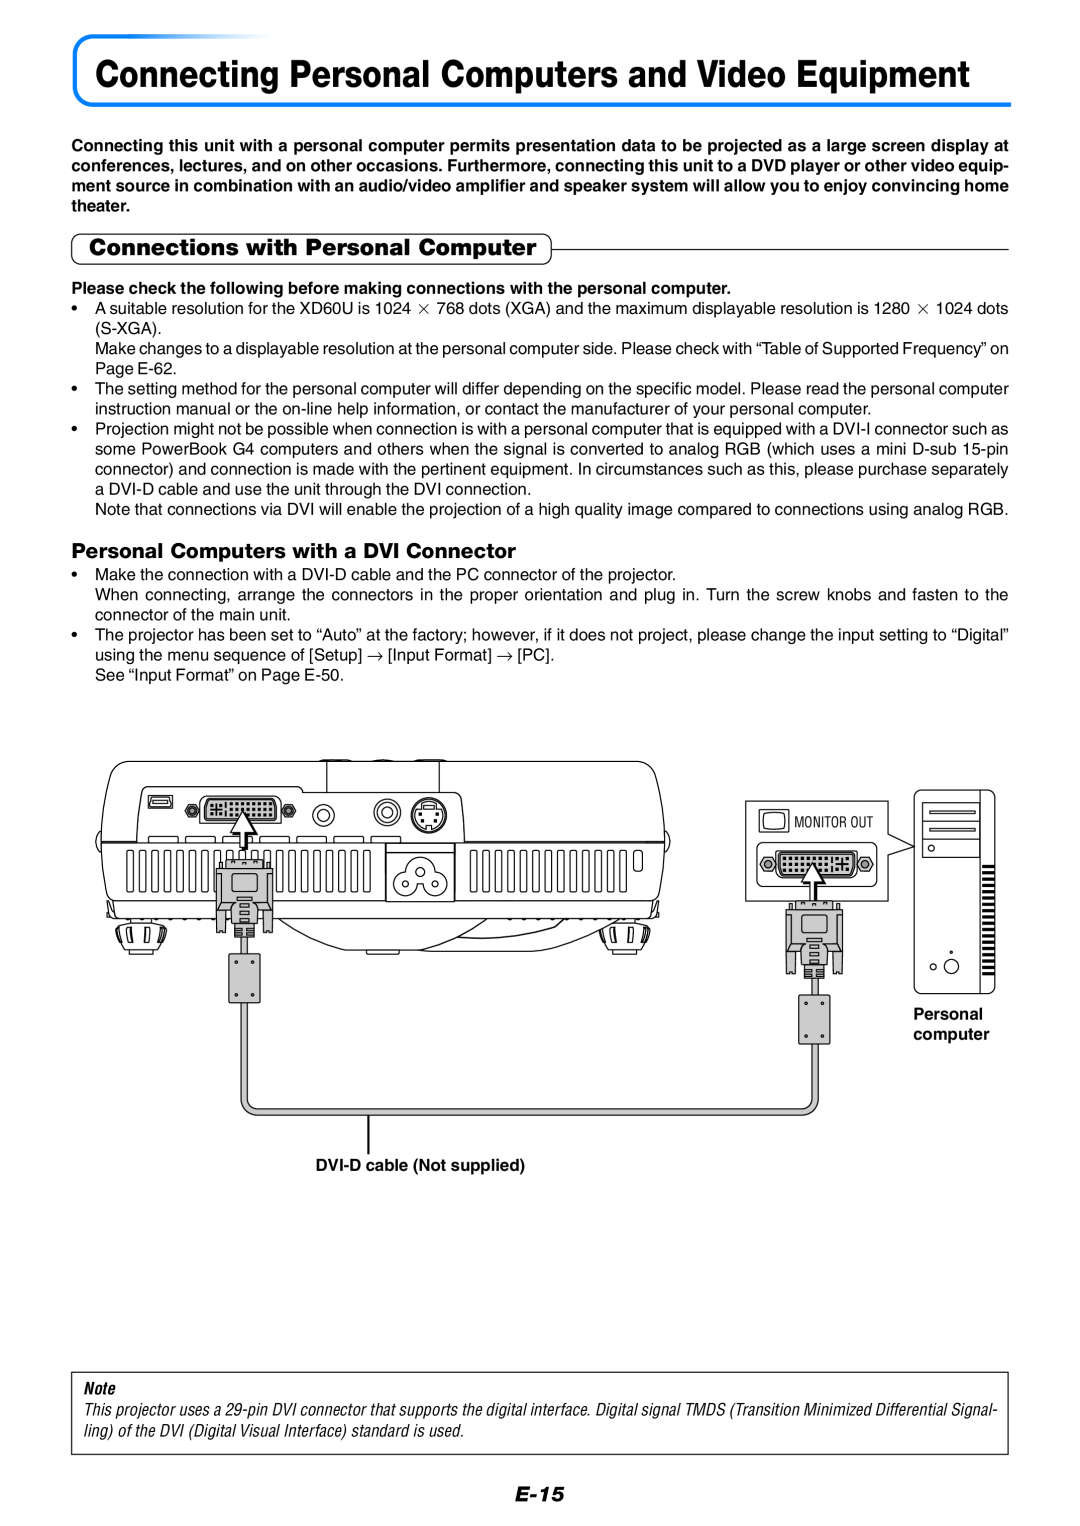 Mitsubishi Electronics XD60U user manual Connections with Personal Computer, Personal Computers with a DVI Connector, E-15 